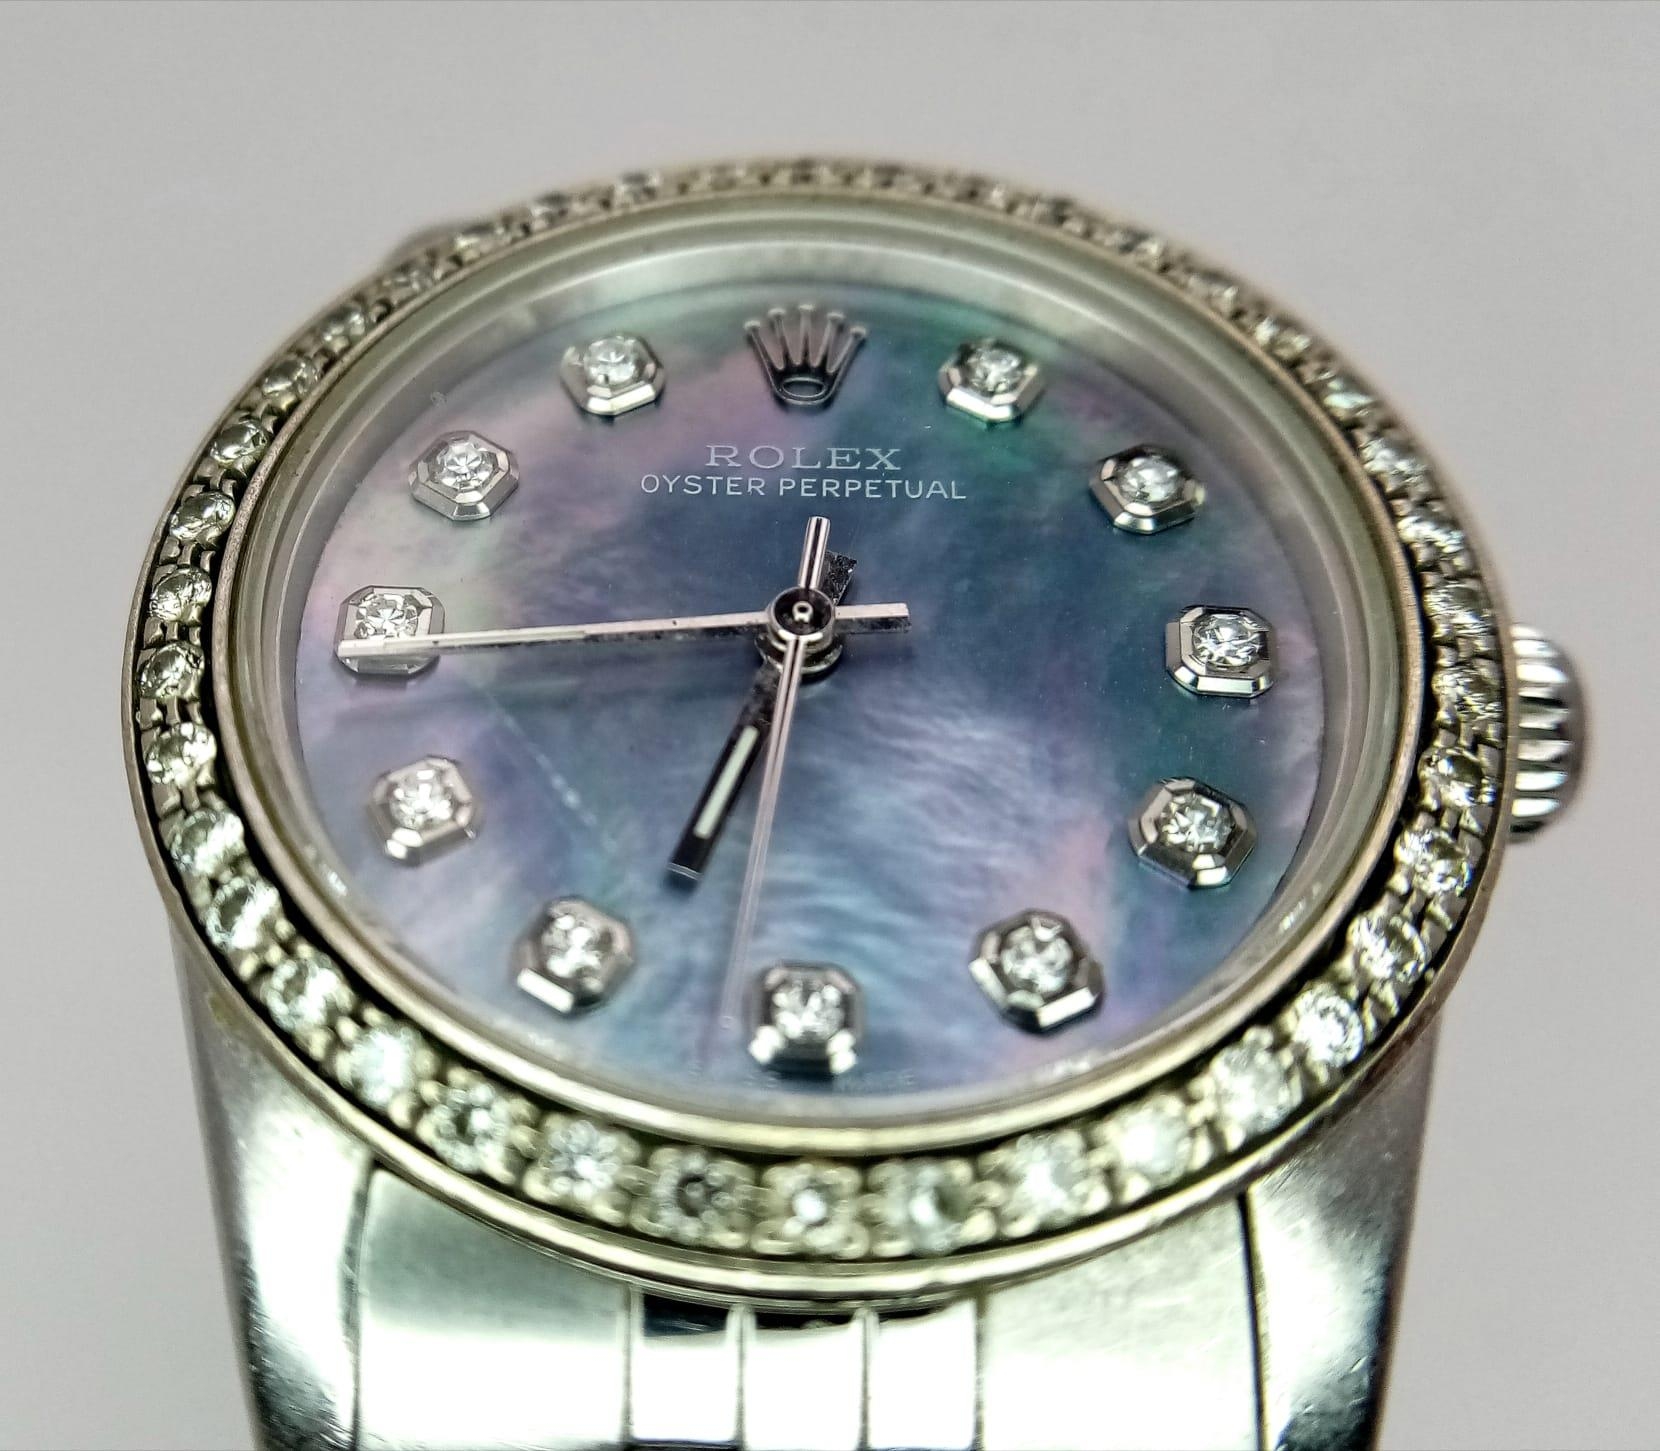 A LADIES ROLEX DRESS WATCH WITH DIAMOND NUMERALS AND BEZEL , MOTHER OF PEARL DIAL AND AUTOMATIC - Image 4 of 10